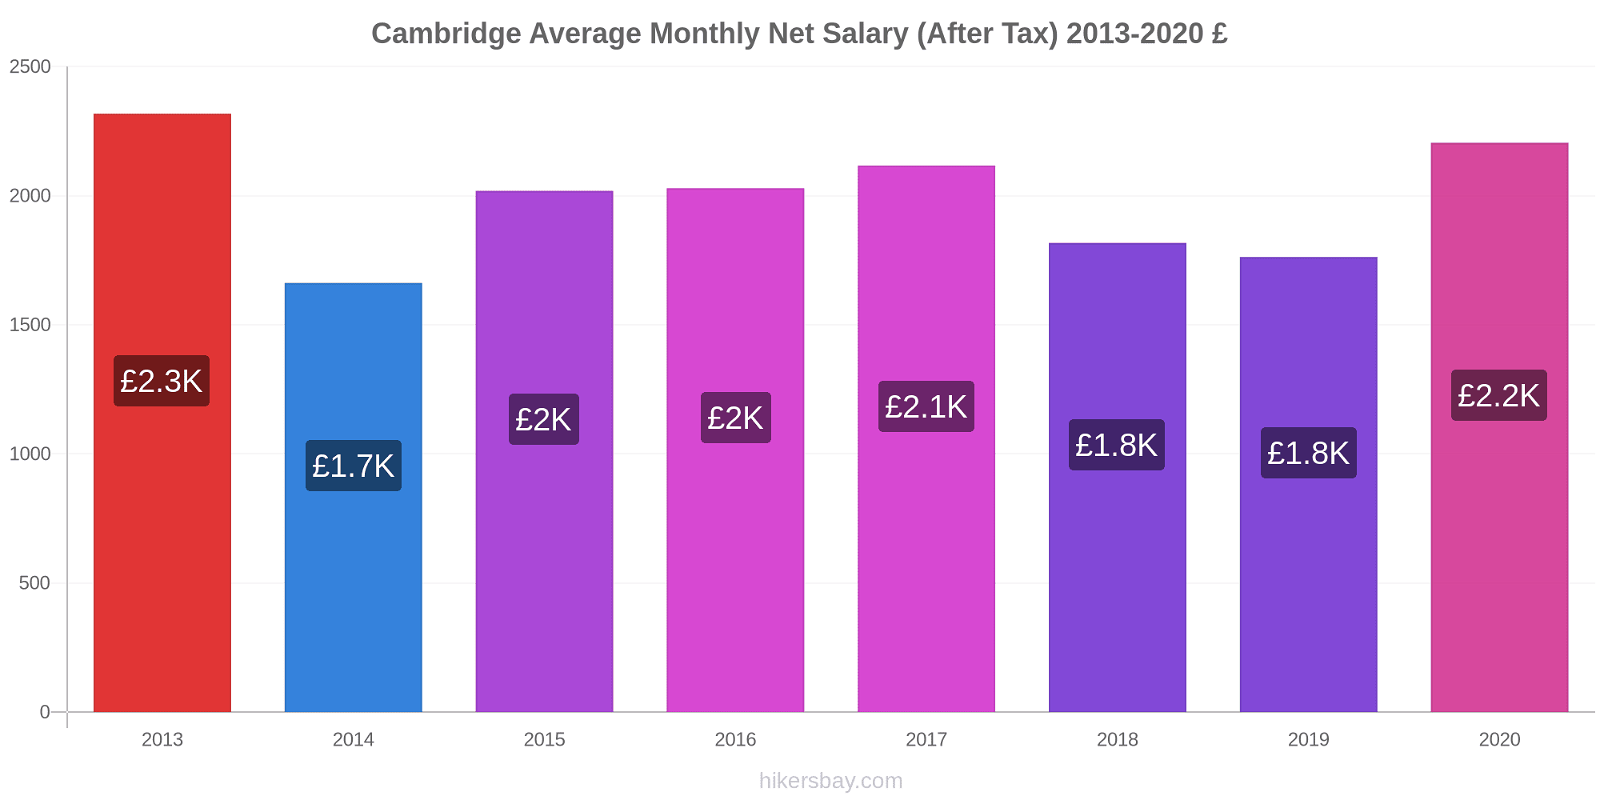 Cambridge price changes Average Monthly Net Salary (After Tax) hikersbay.com